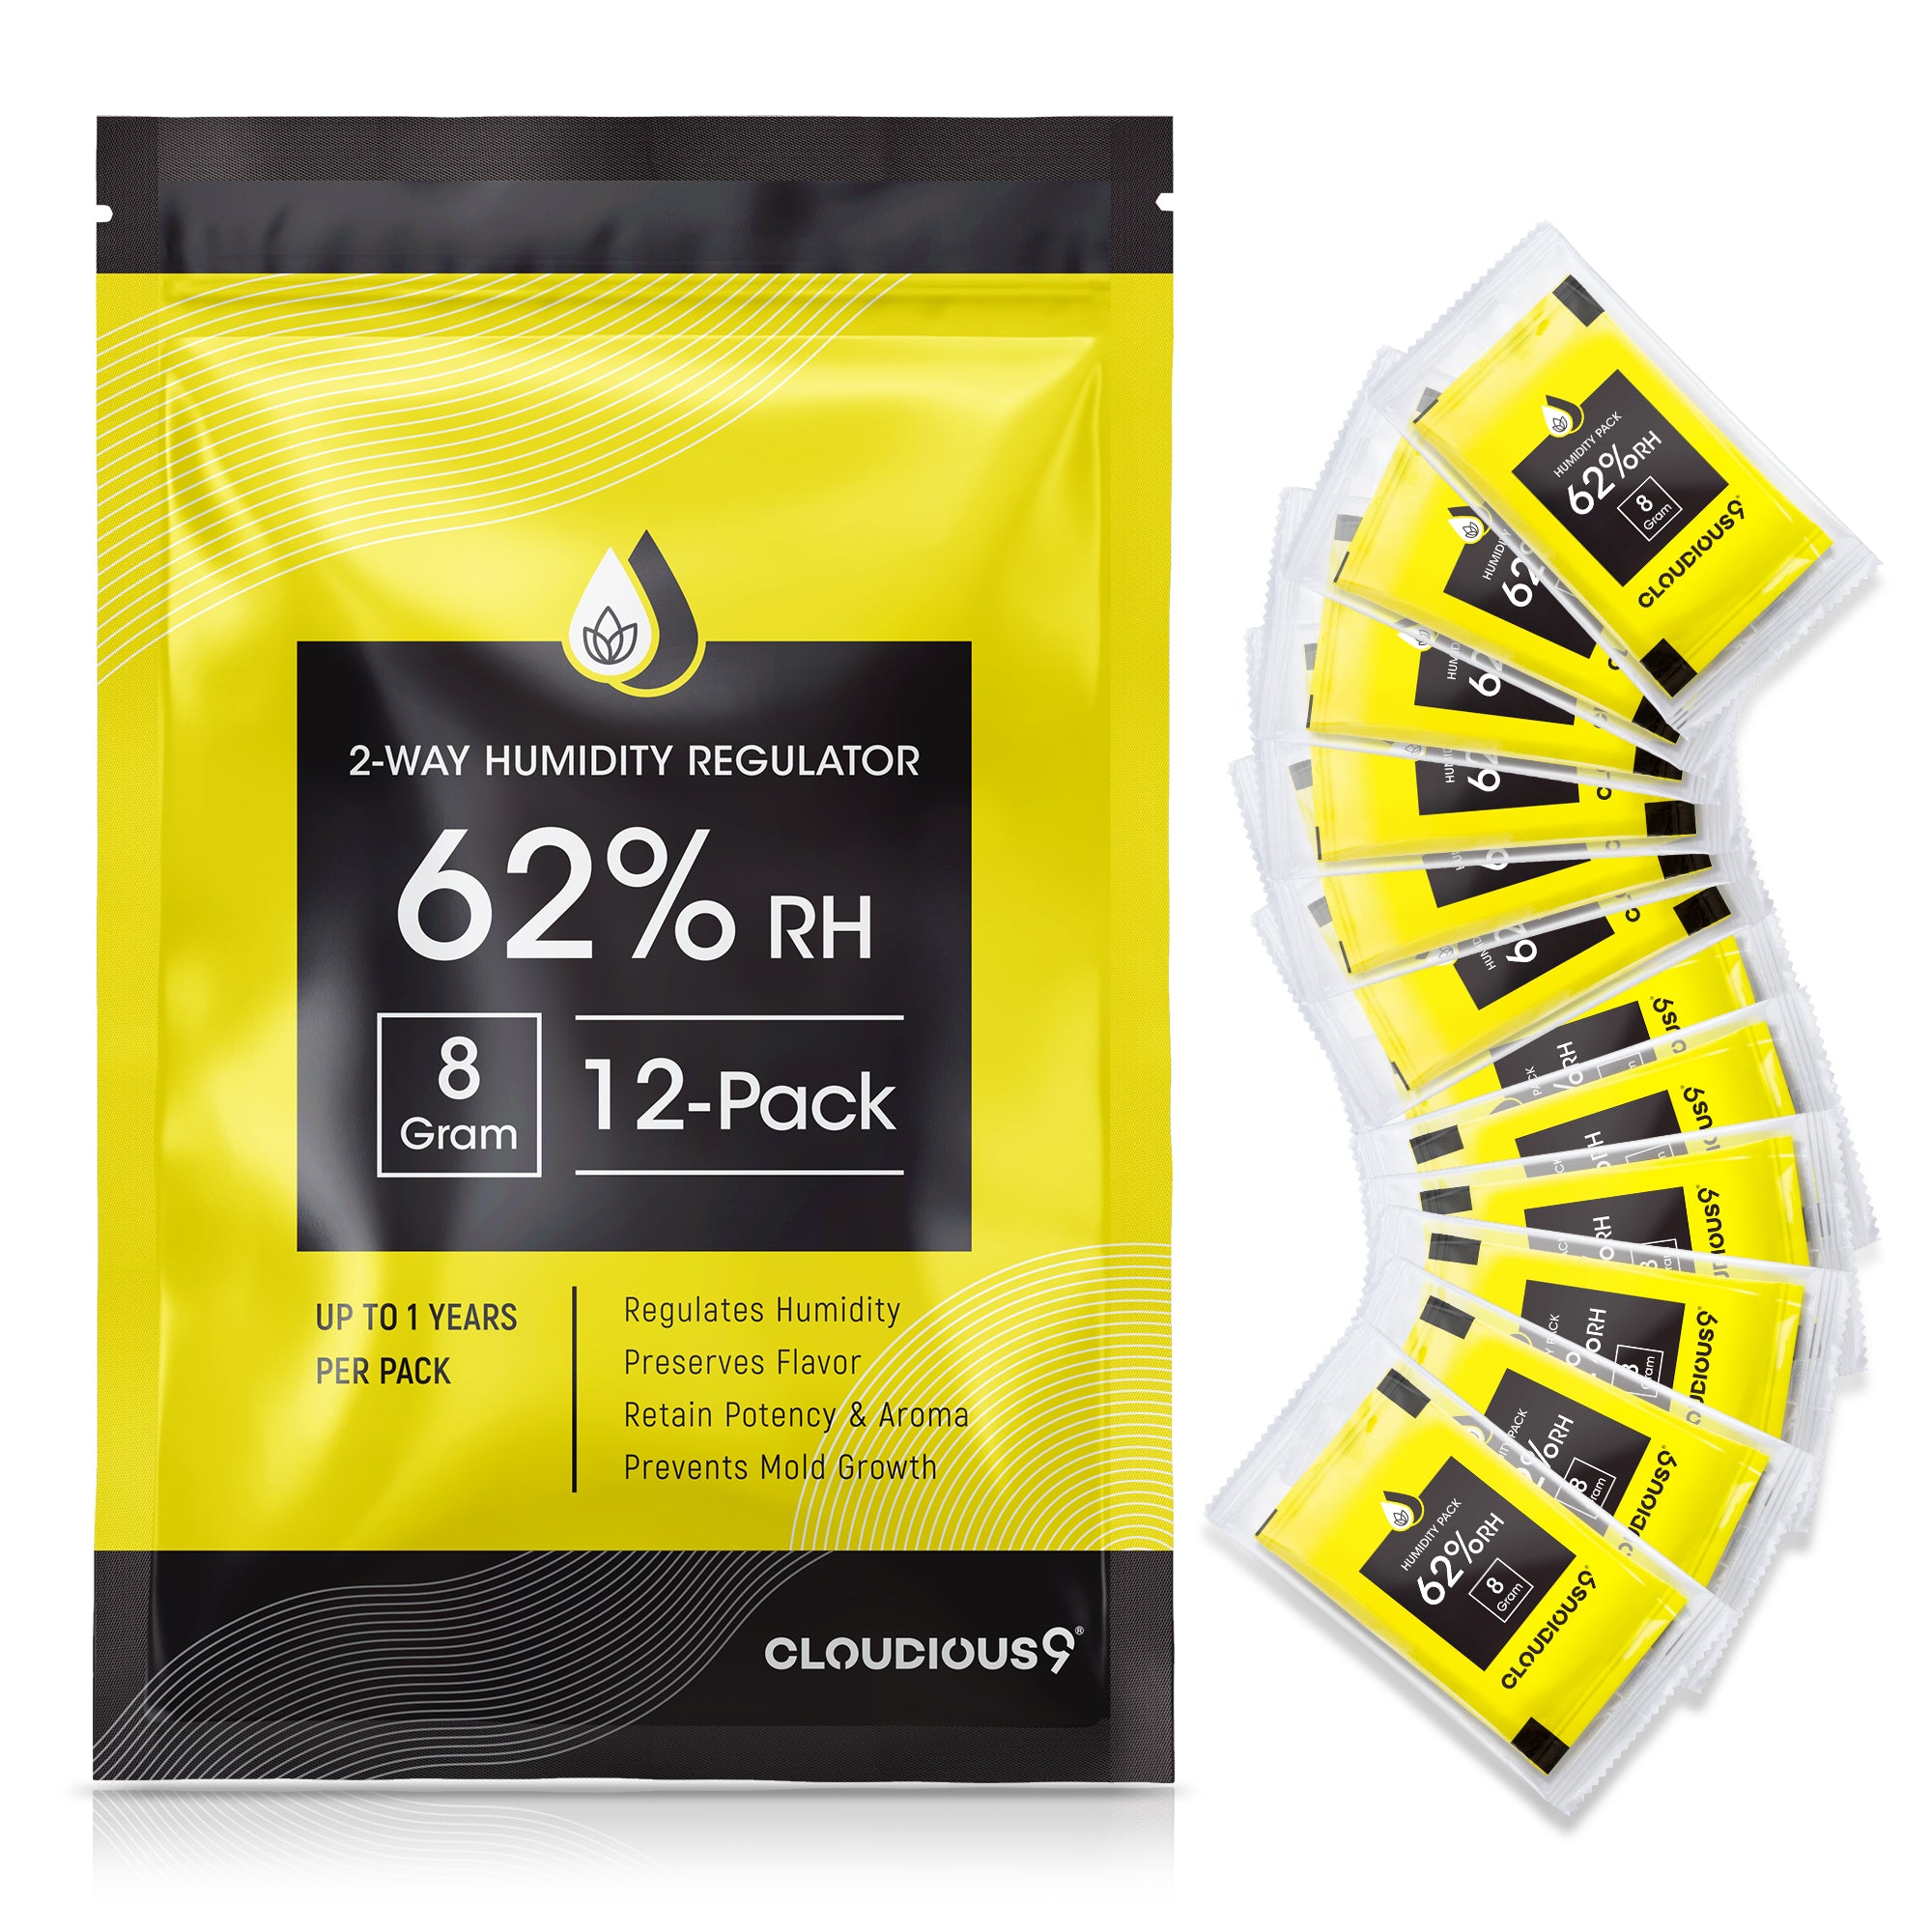 Black and yellow packets and a bag with 2-way humidity regulators inside.